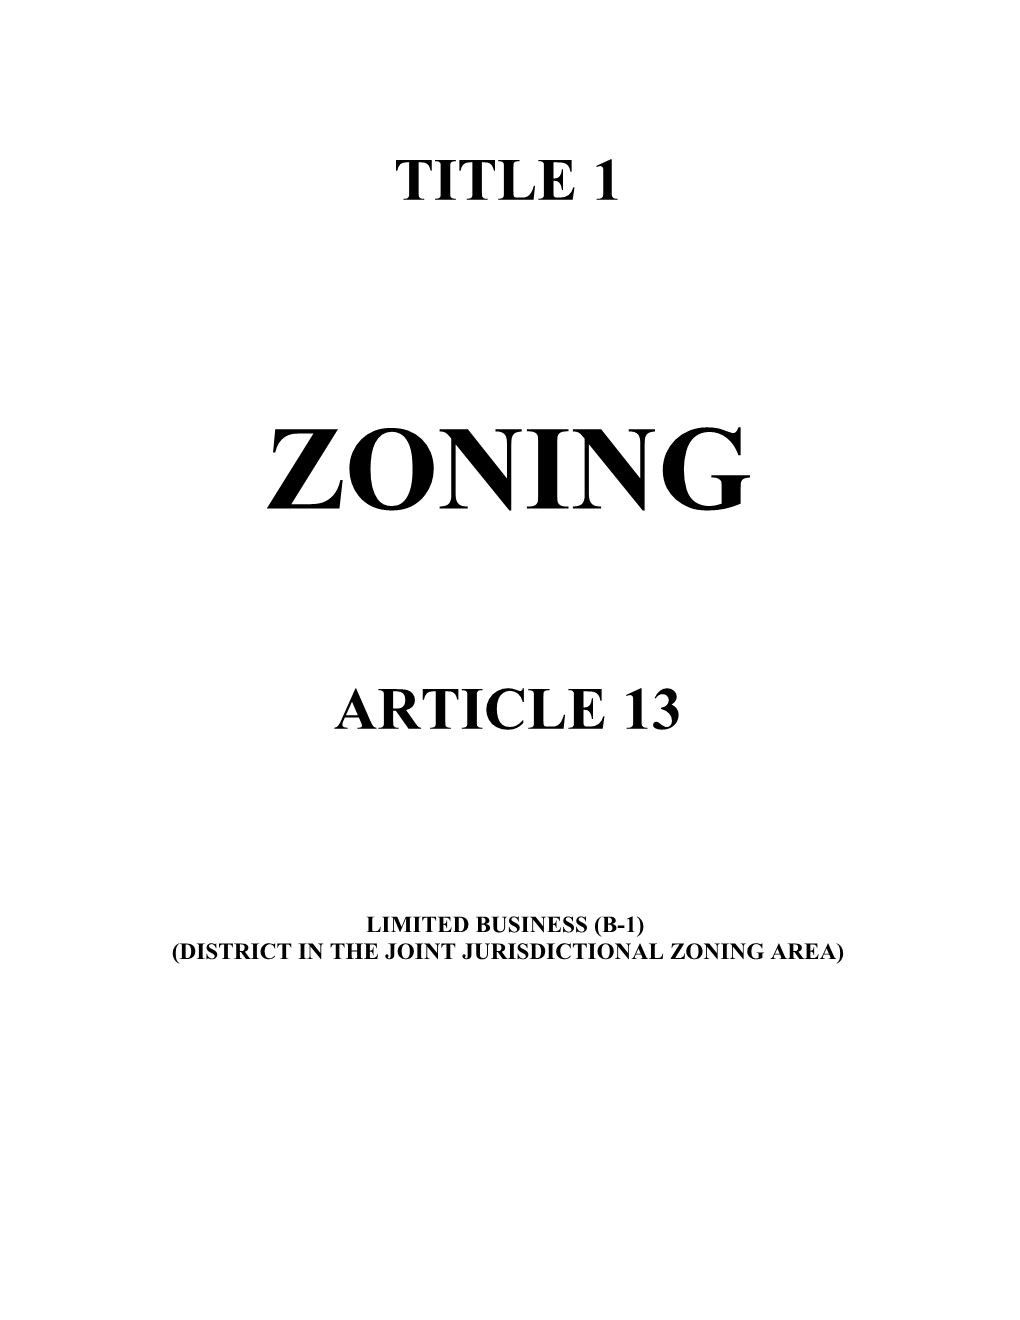 District in the Joint Jurisdictional Zoning Area